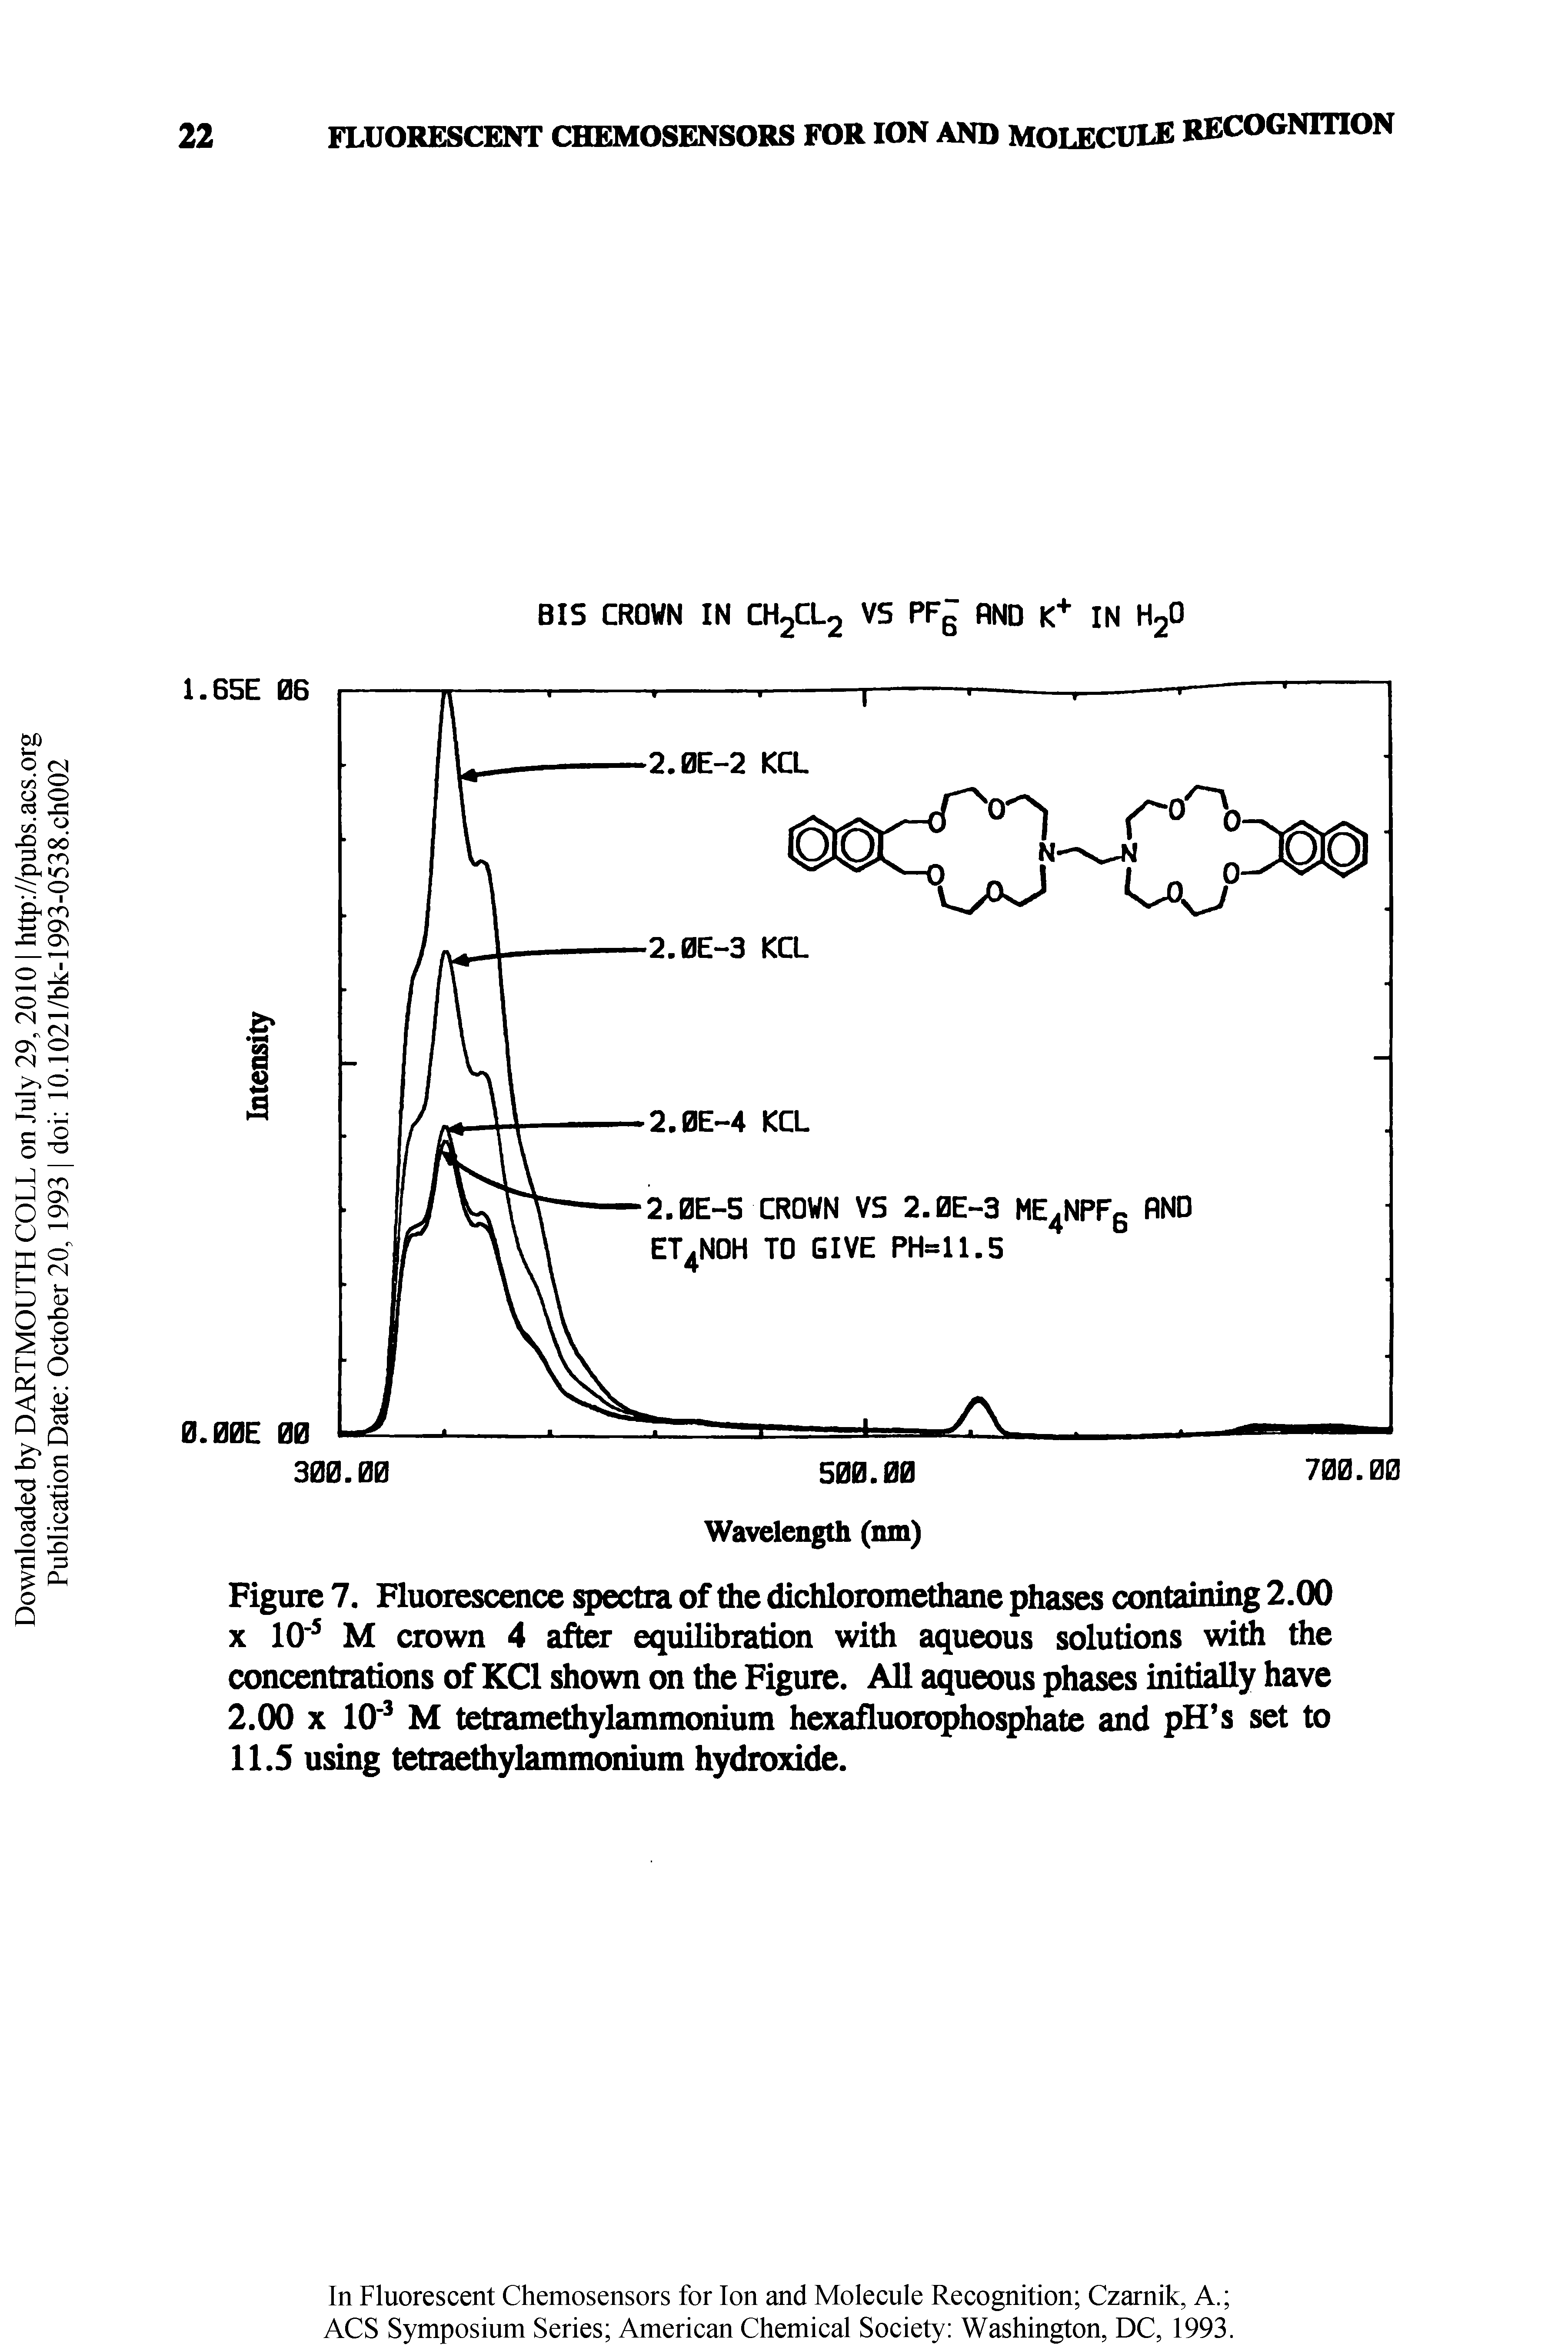 Figure . Fluorescence iqiectra of the dichloromethane phases containing 2.00 X 10 M crown 4 after equilibration with aqueous solutions with the concentrations of KCl shown on the Figure. All aqueous phases initially have 2.00 X 10 M tetramethylammonium hexafluorophosphate and pH s set to ll.S using tetraethylammonium hydroxide.